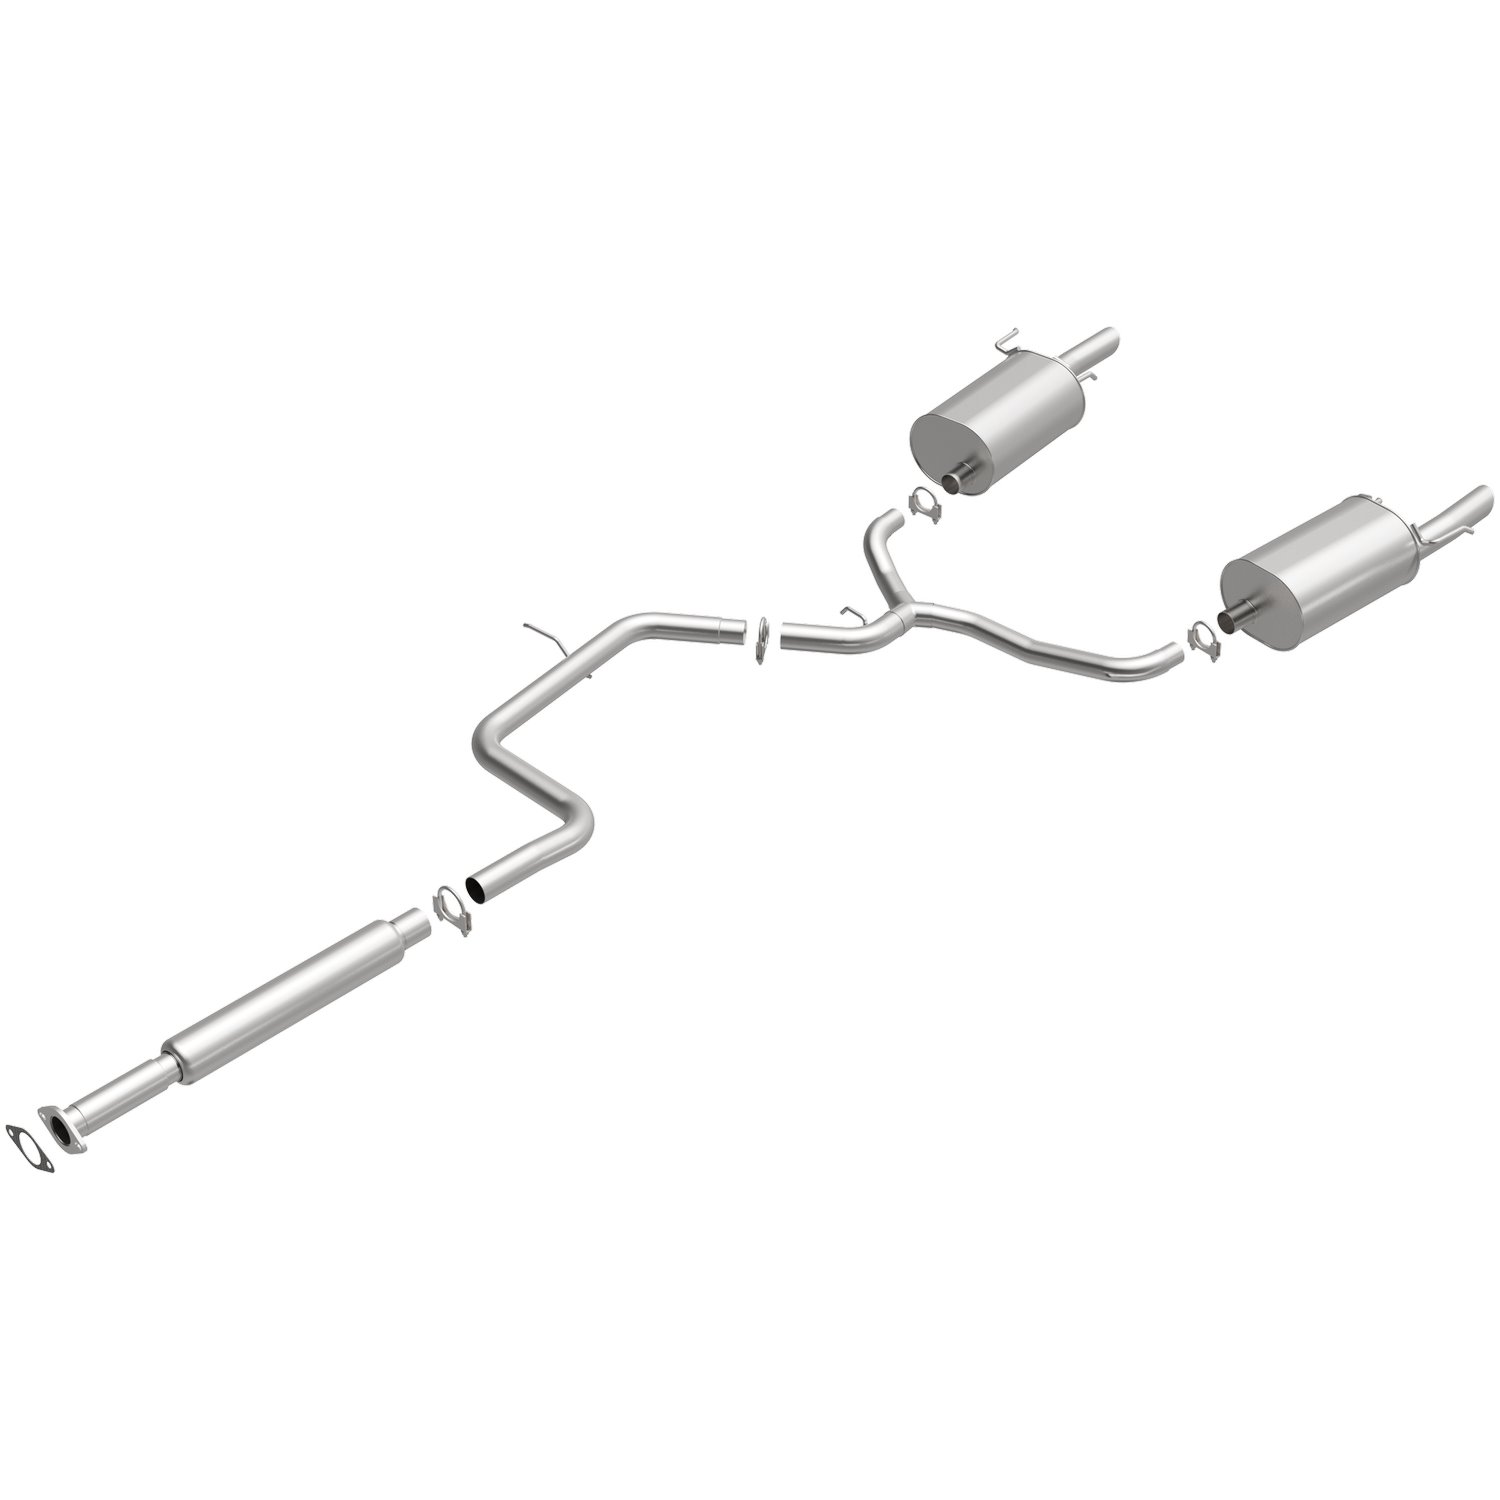 Direct-Fit Exhaust Kit, 2003-2005 Chevy Monte Carlo 3.8L